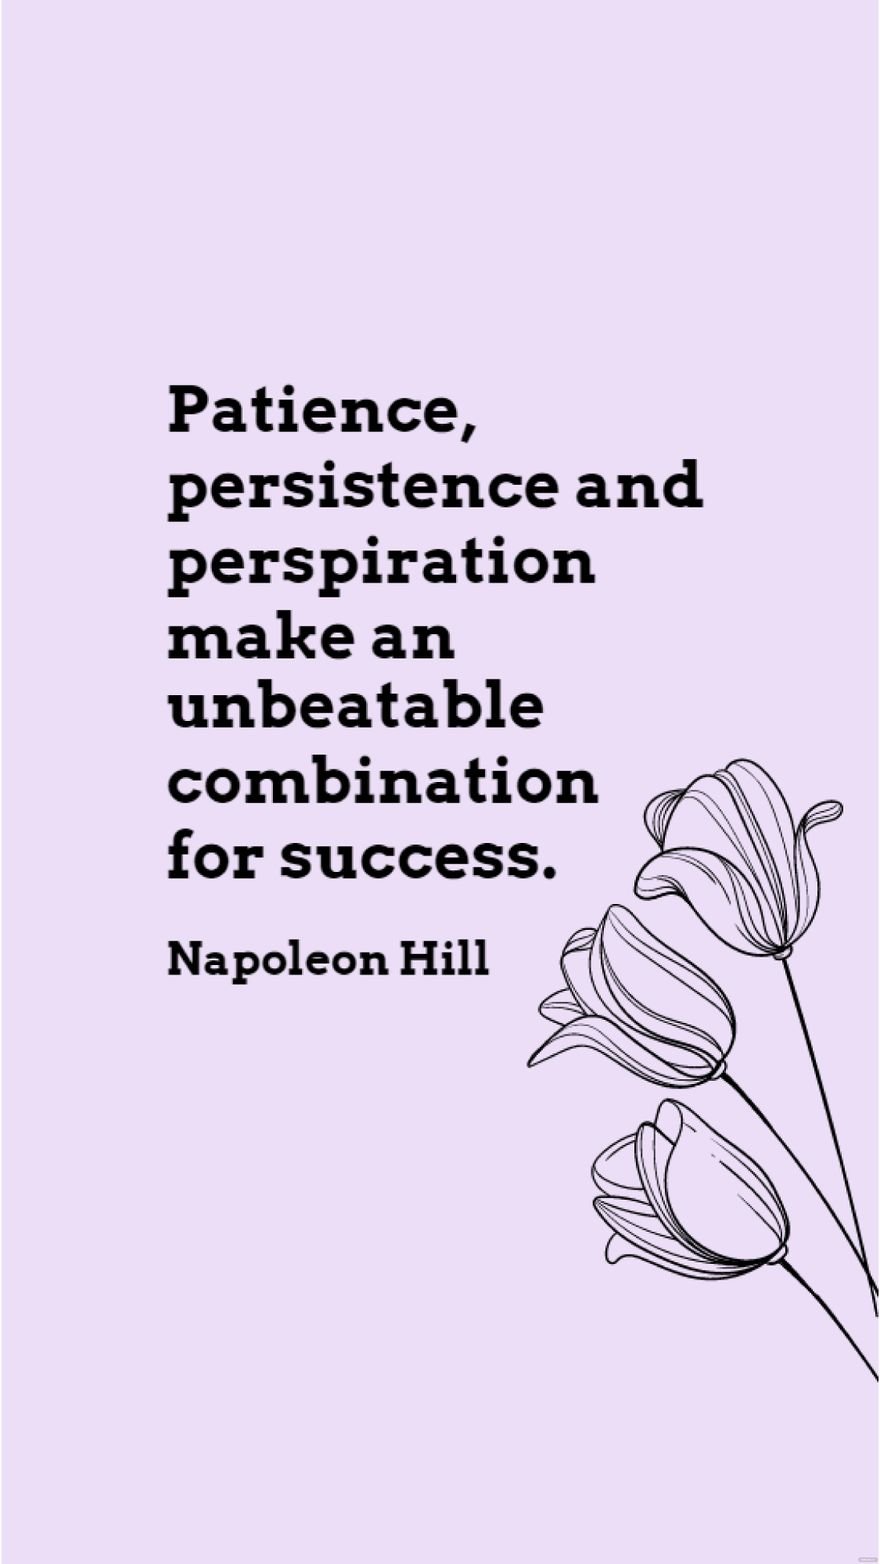 Free Napoleon Hill - Patience, persistence and perspiration make an unbeatable combination for success. in JPG